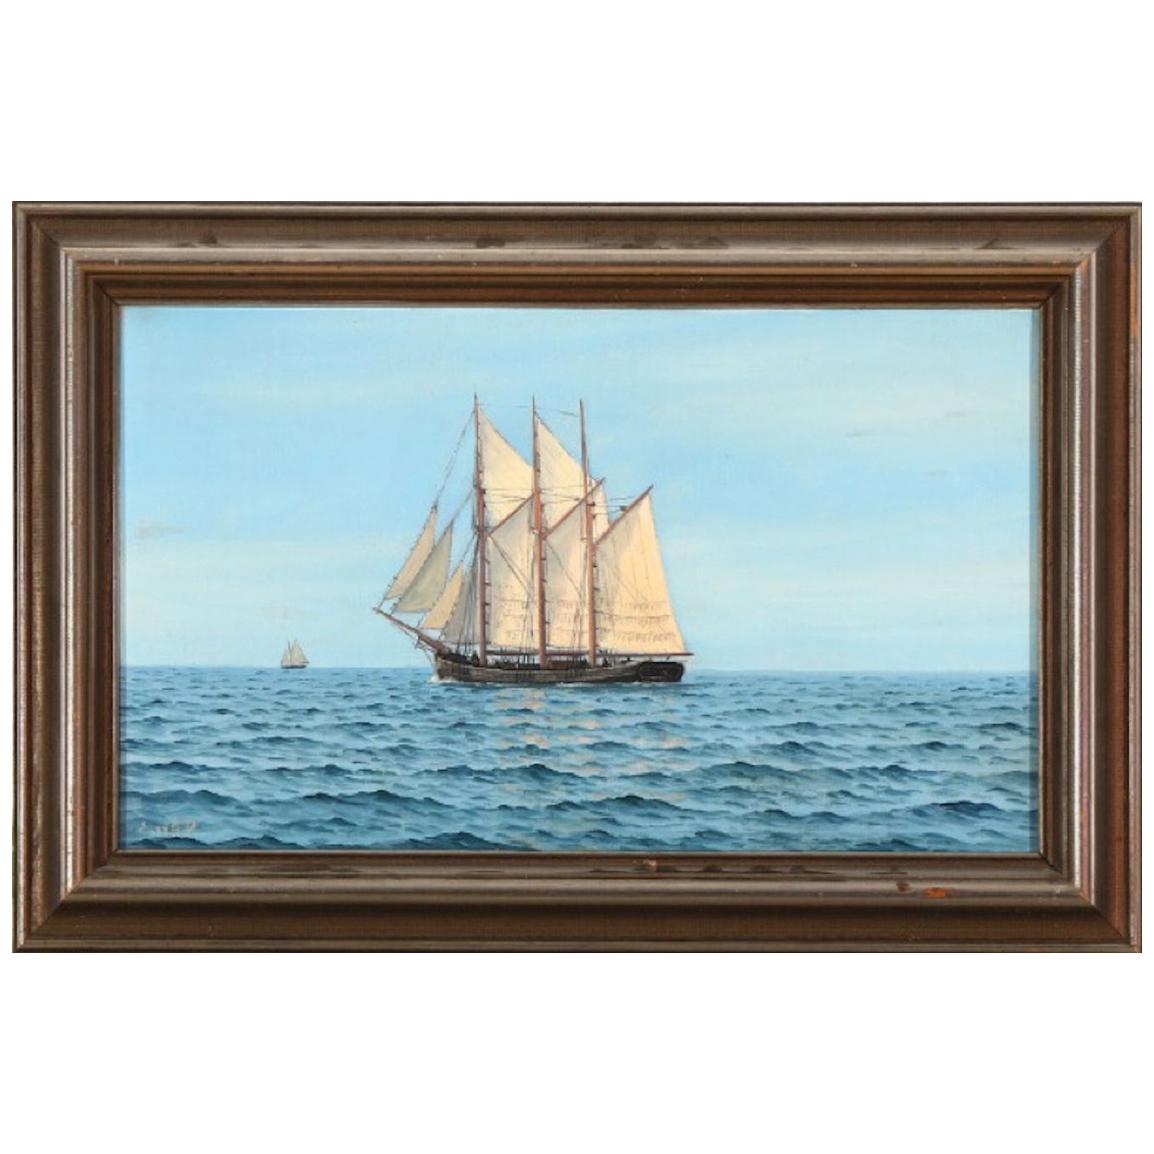 Seascape with Sailing Ships on a Calm Day, Oil on Canvas